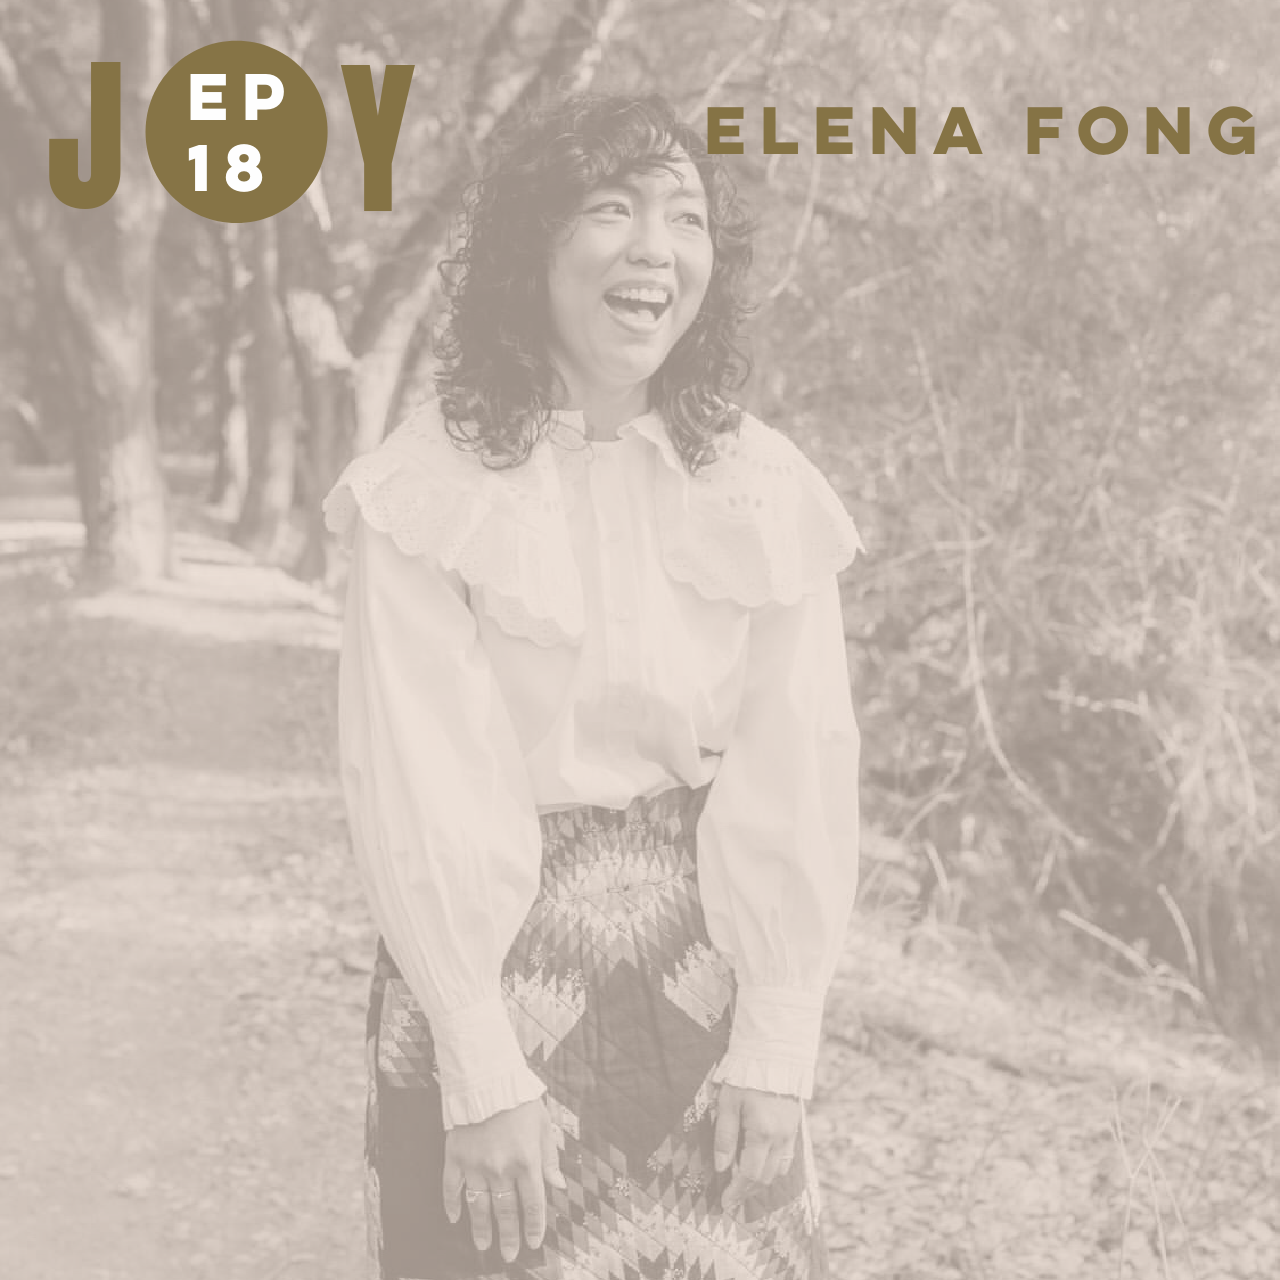 JOY IS NOW: LET'S TALK GRIEF WITH ELENA FONG